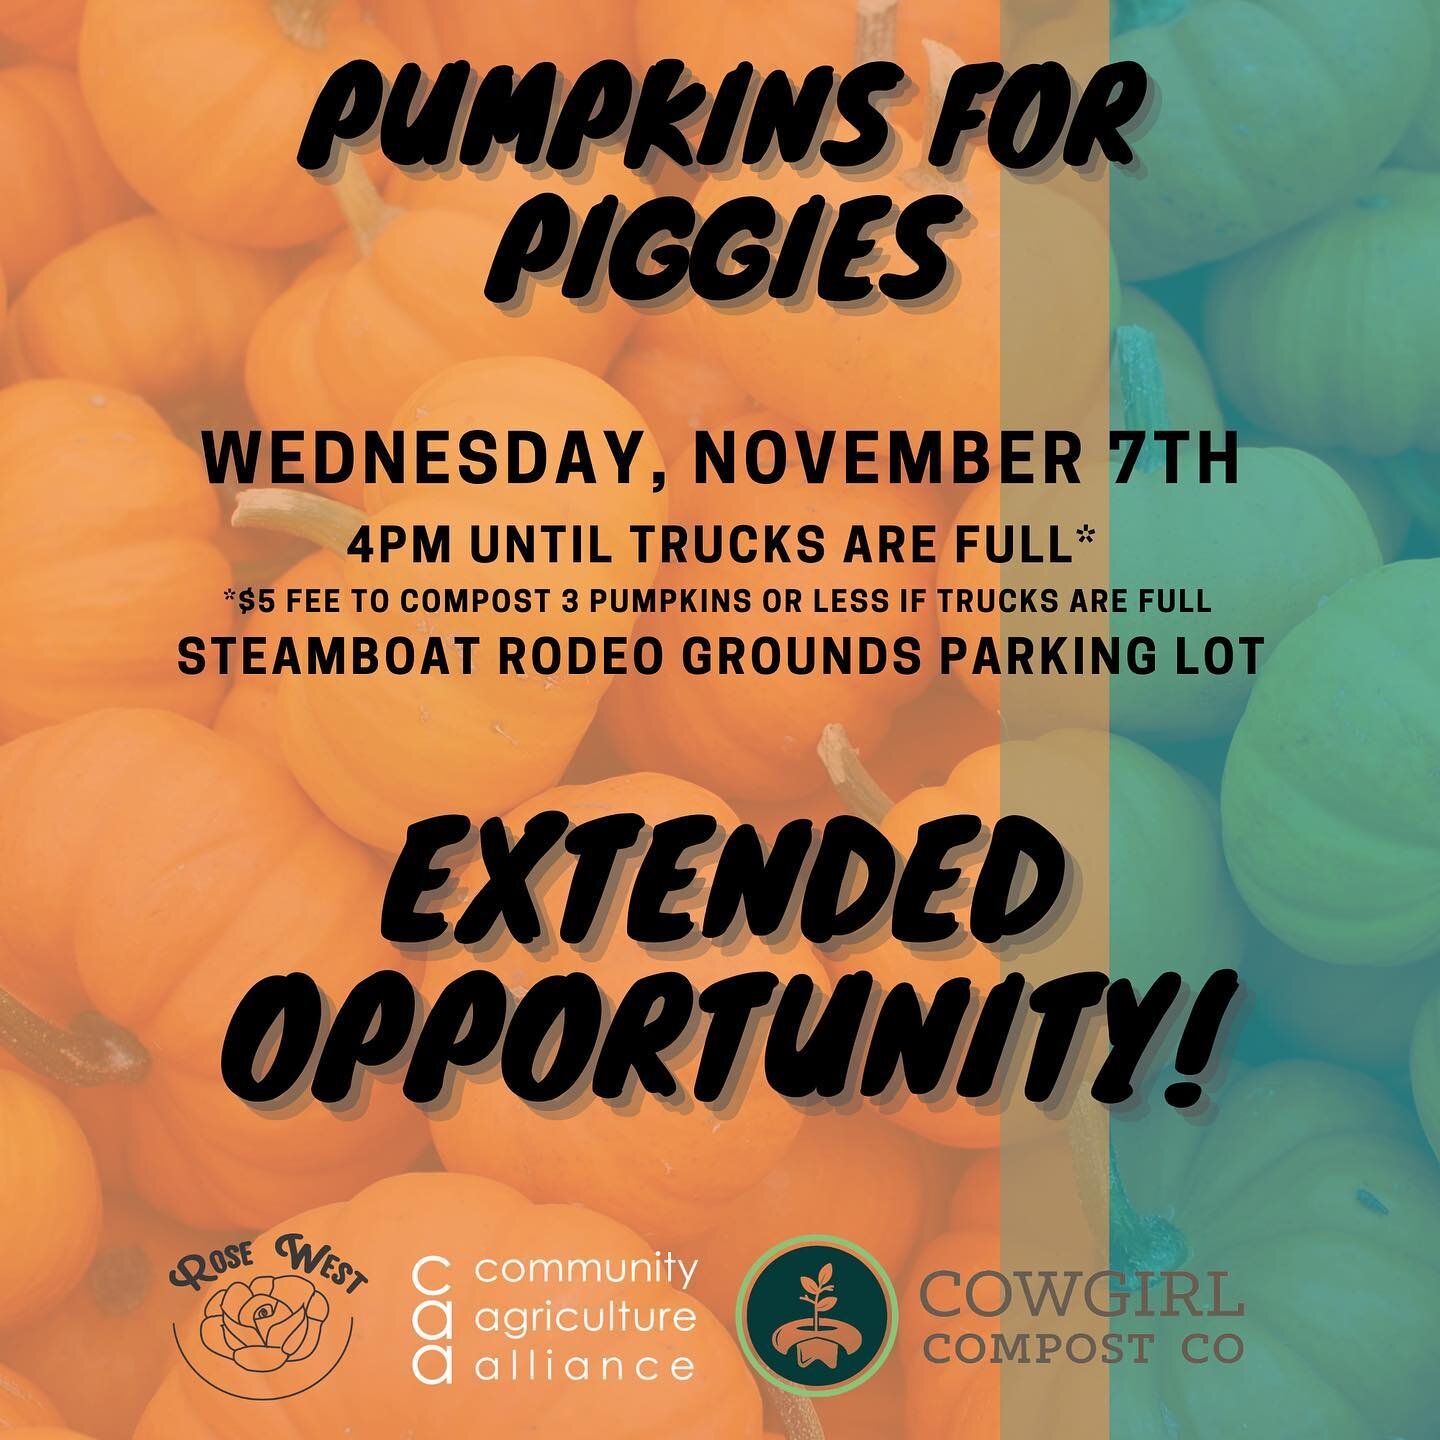 Didn&rsquo;t get a chance to give your pumpkins to the piggies earlier this week? THERE&rsquo;S STILL TIME!
We decided to extend the event this year so that you have more chances for you pumpkin to go to use as livestock feed instead of ending up as 